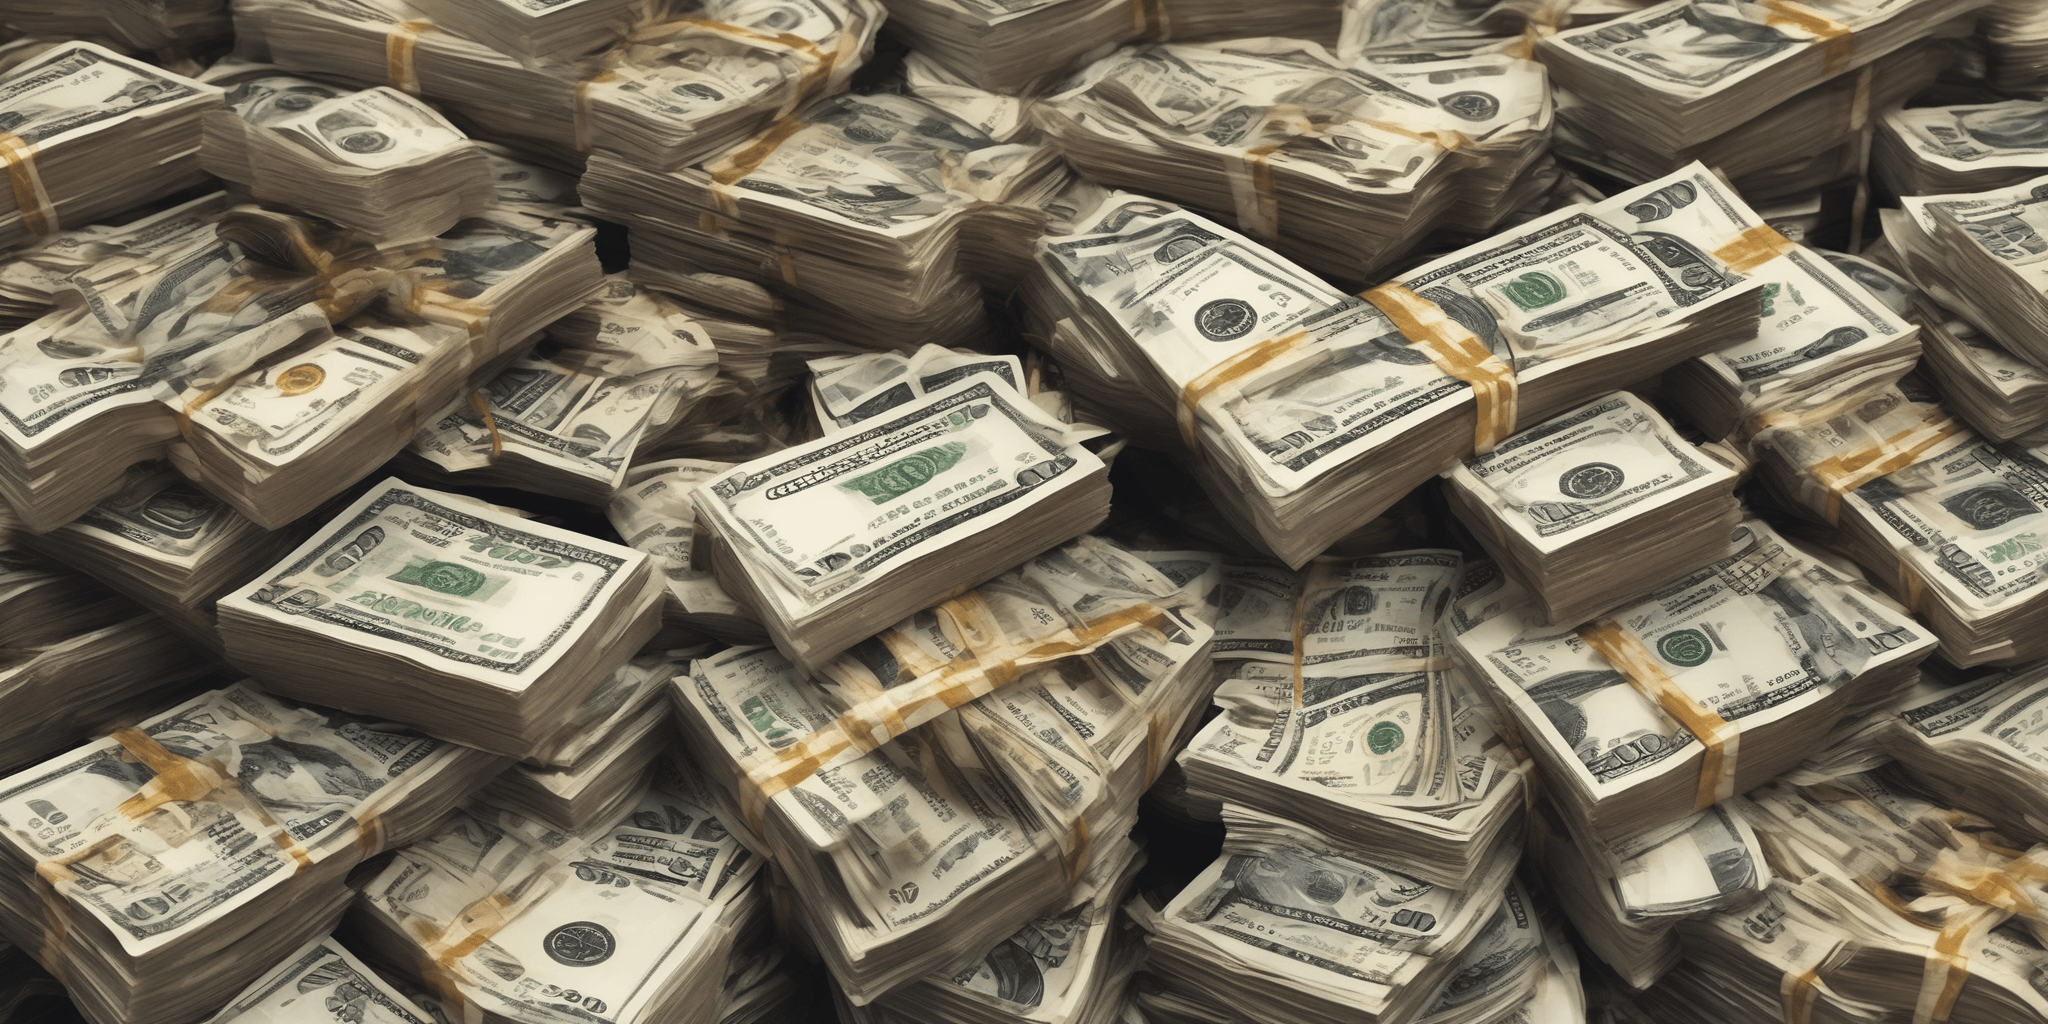 Money stack  in realistic, photographic style